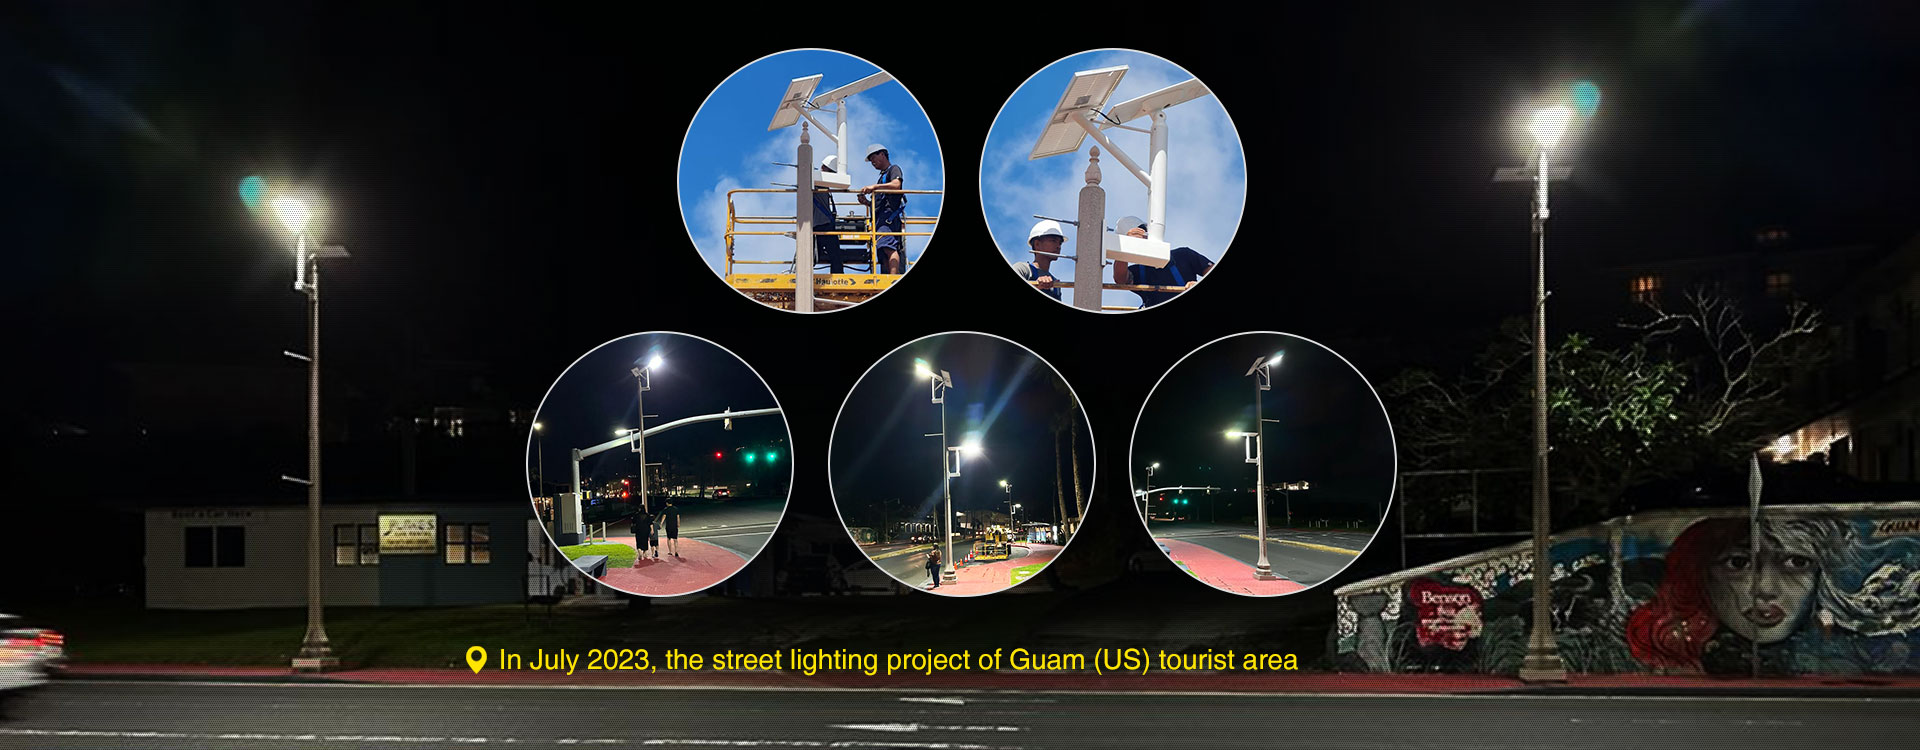 In July 2023, the street lighting project of Guam (US) tourist area